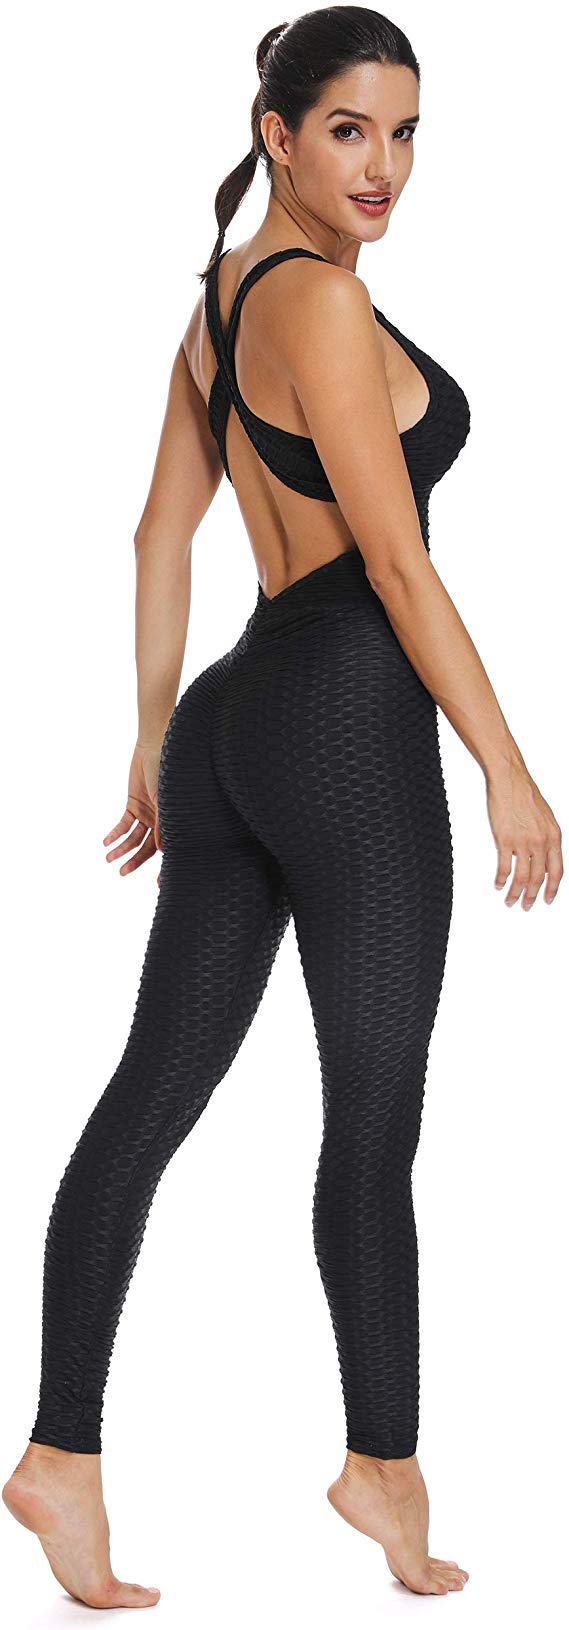 FITTOO Womens Sexy Backless Workout Romper Jumpsuit Textured One Piece Activewear